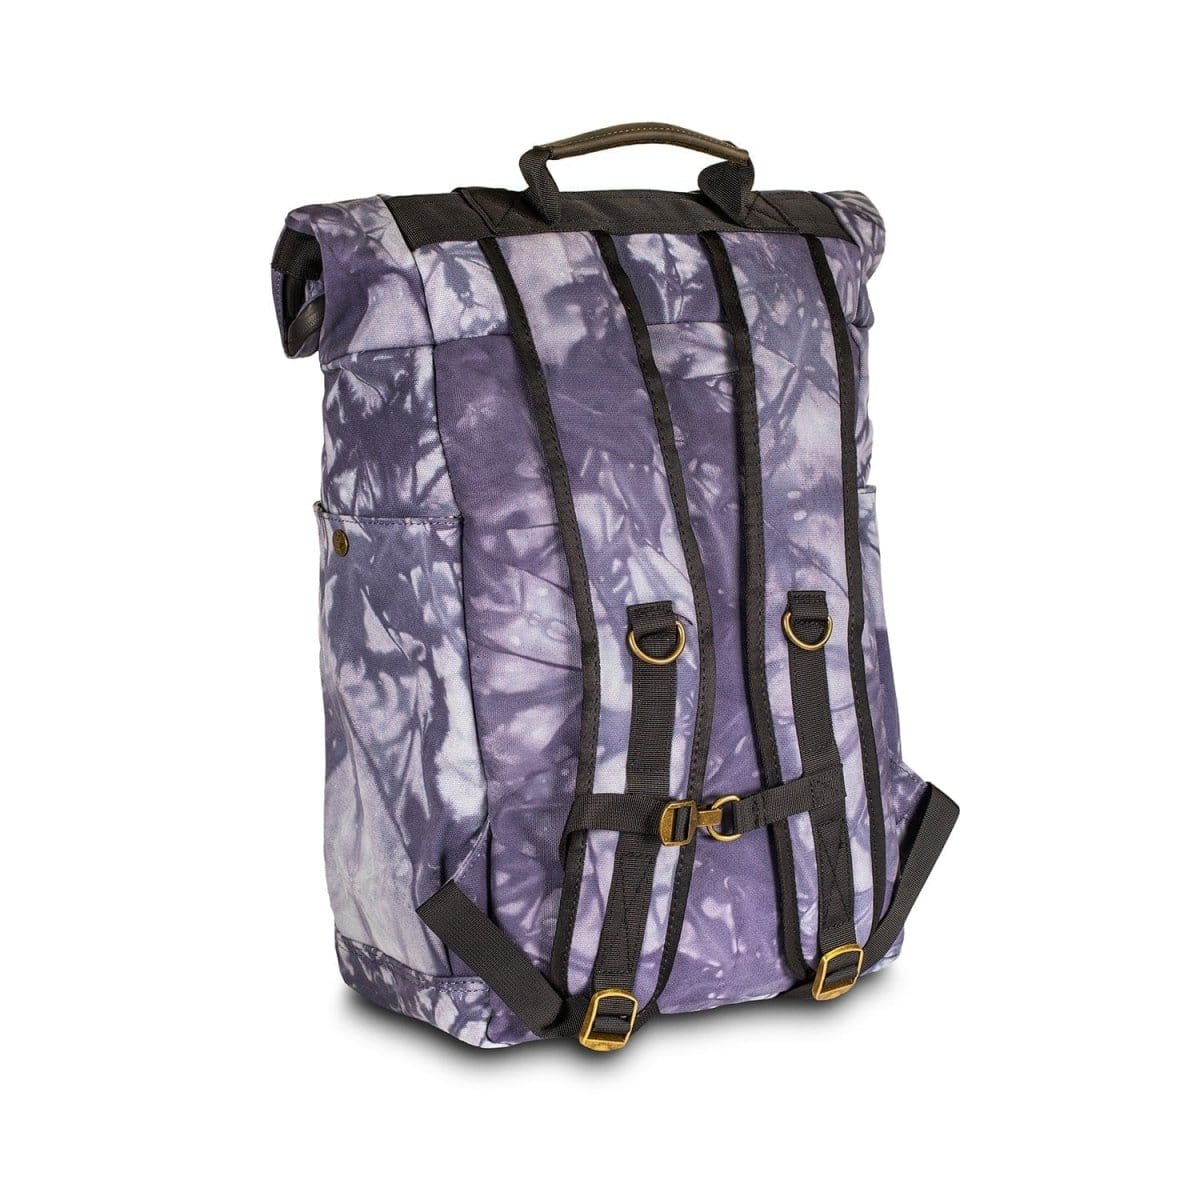 Revelry Supply Travel Bag The Drifter - Smell Proof Rolltop Backpack